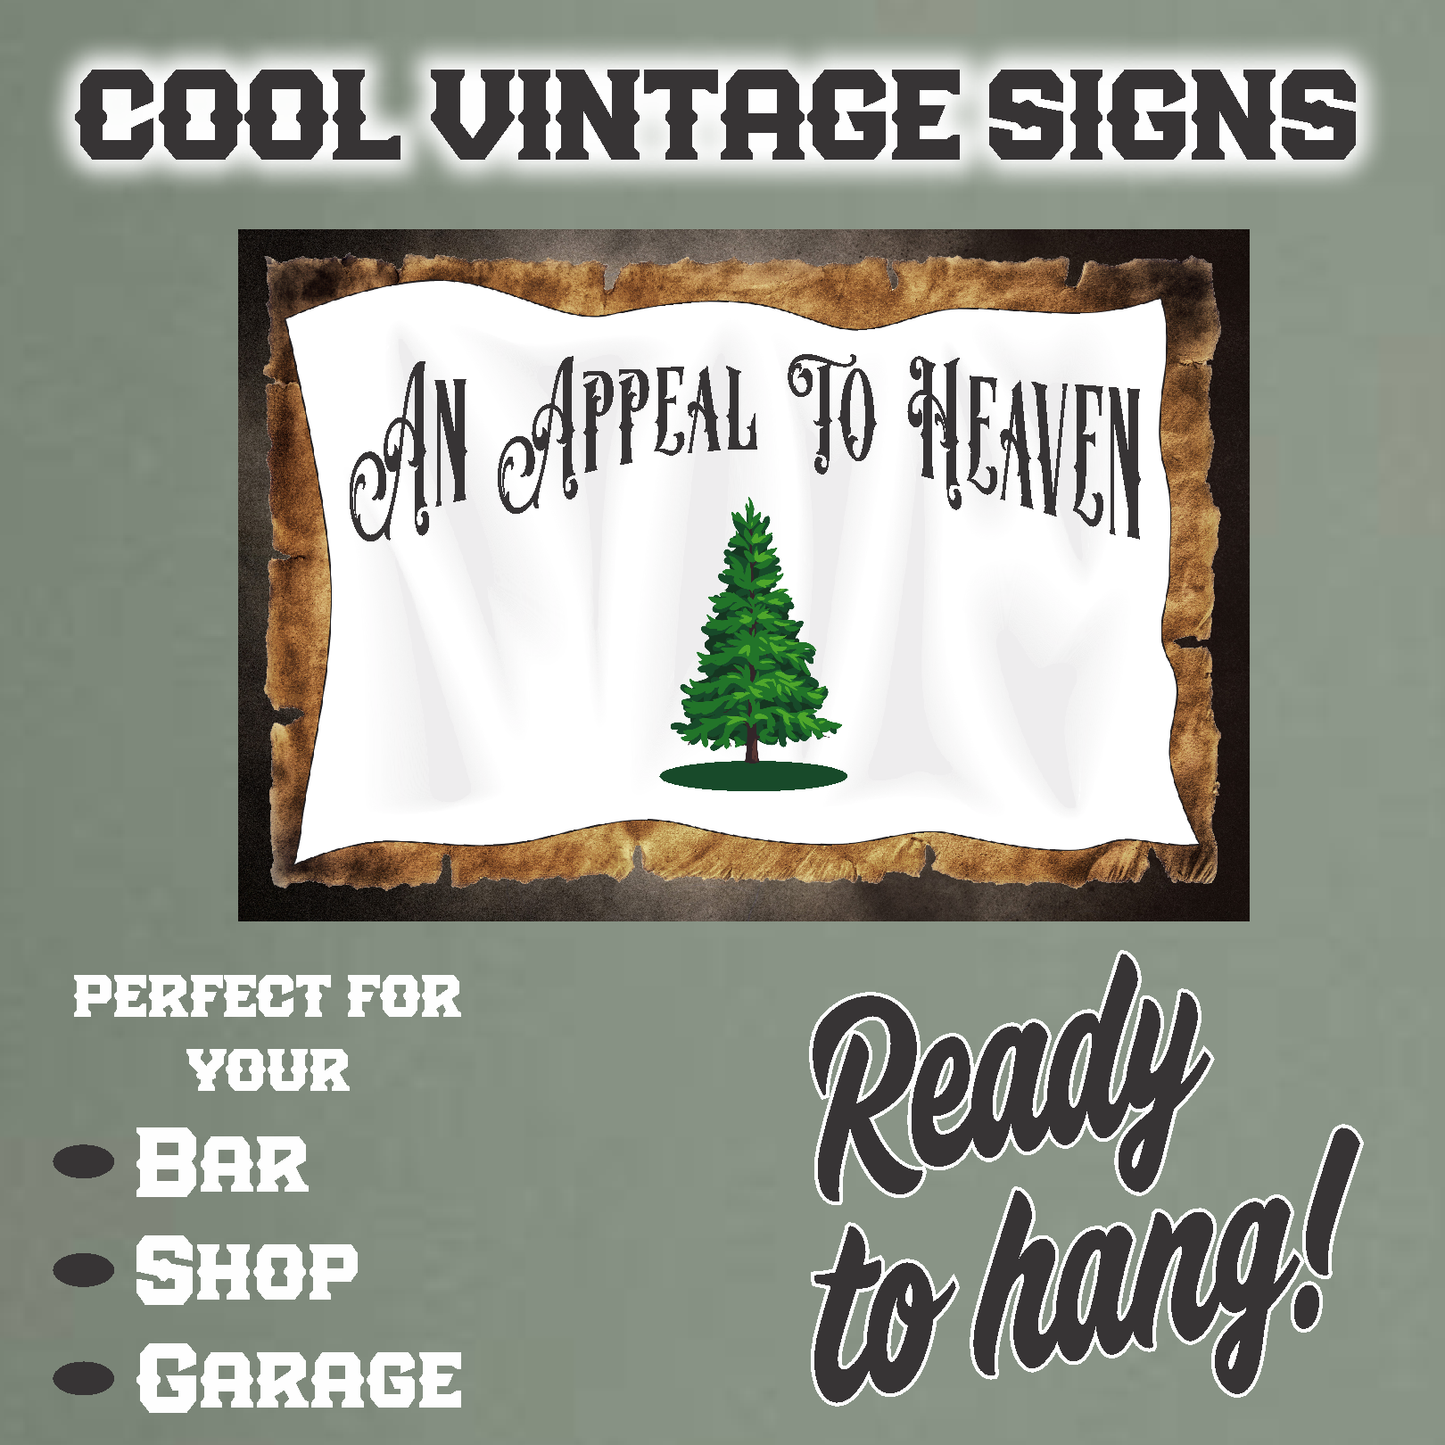 An Appeal To Heaven (Horizontal) - 12" x 18" Vintage Metal Sign